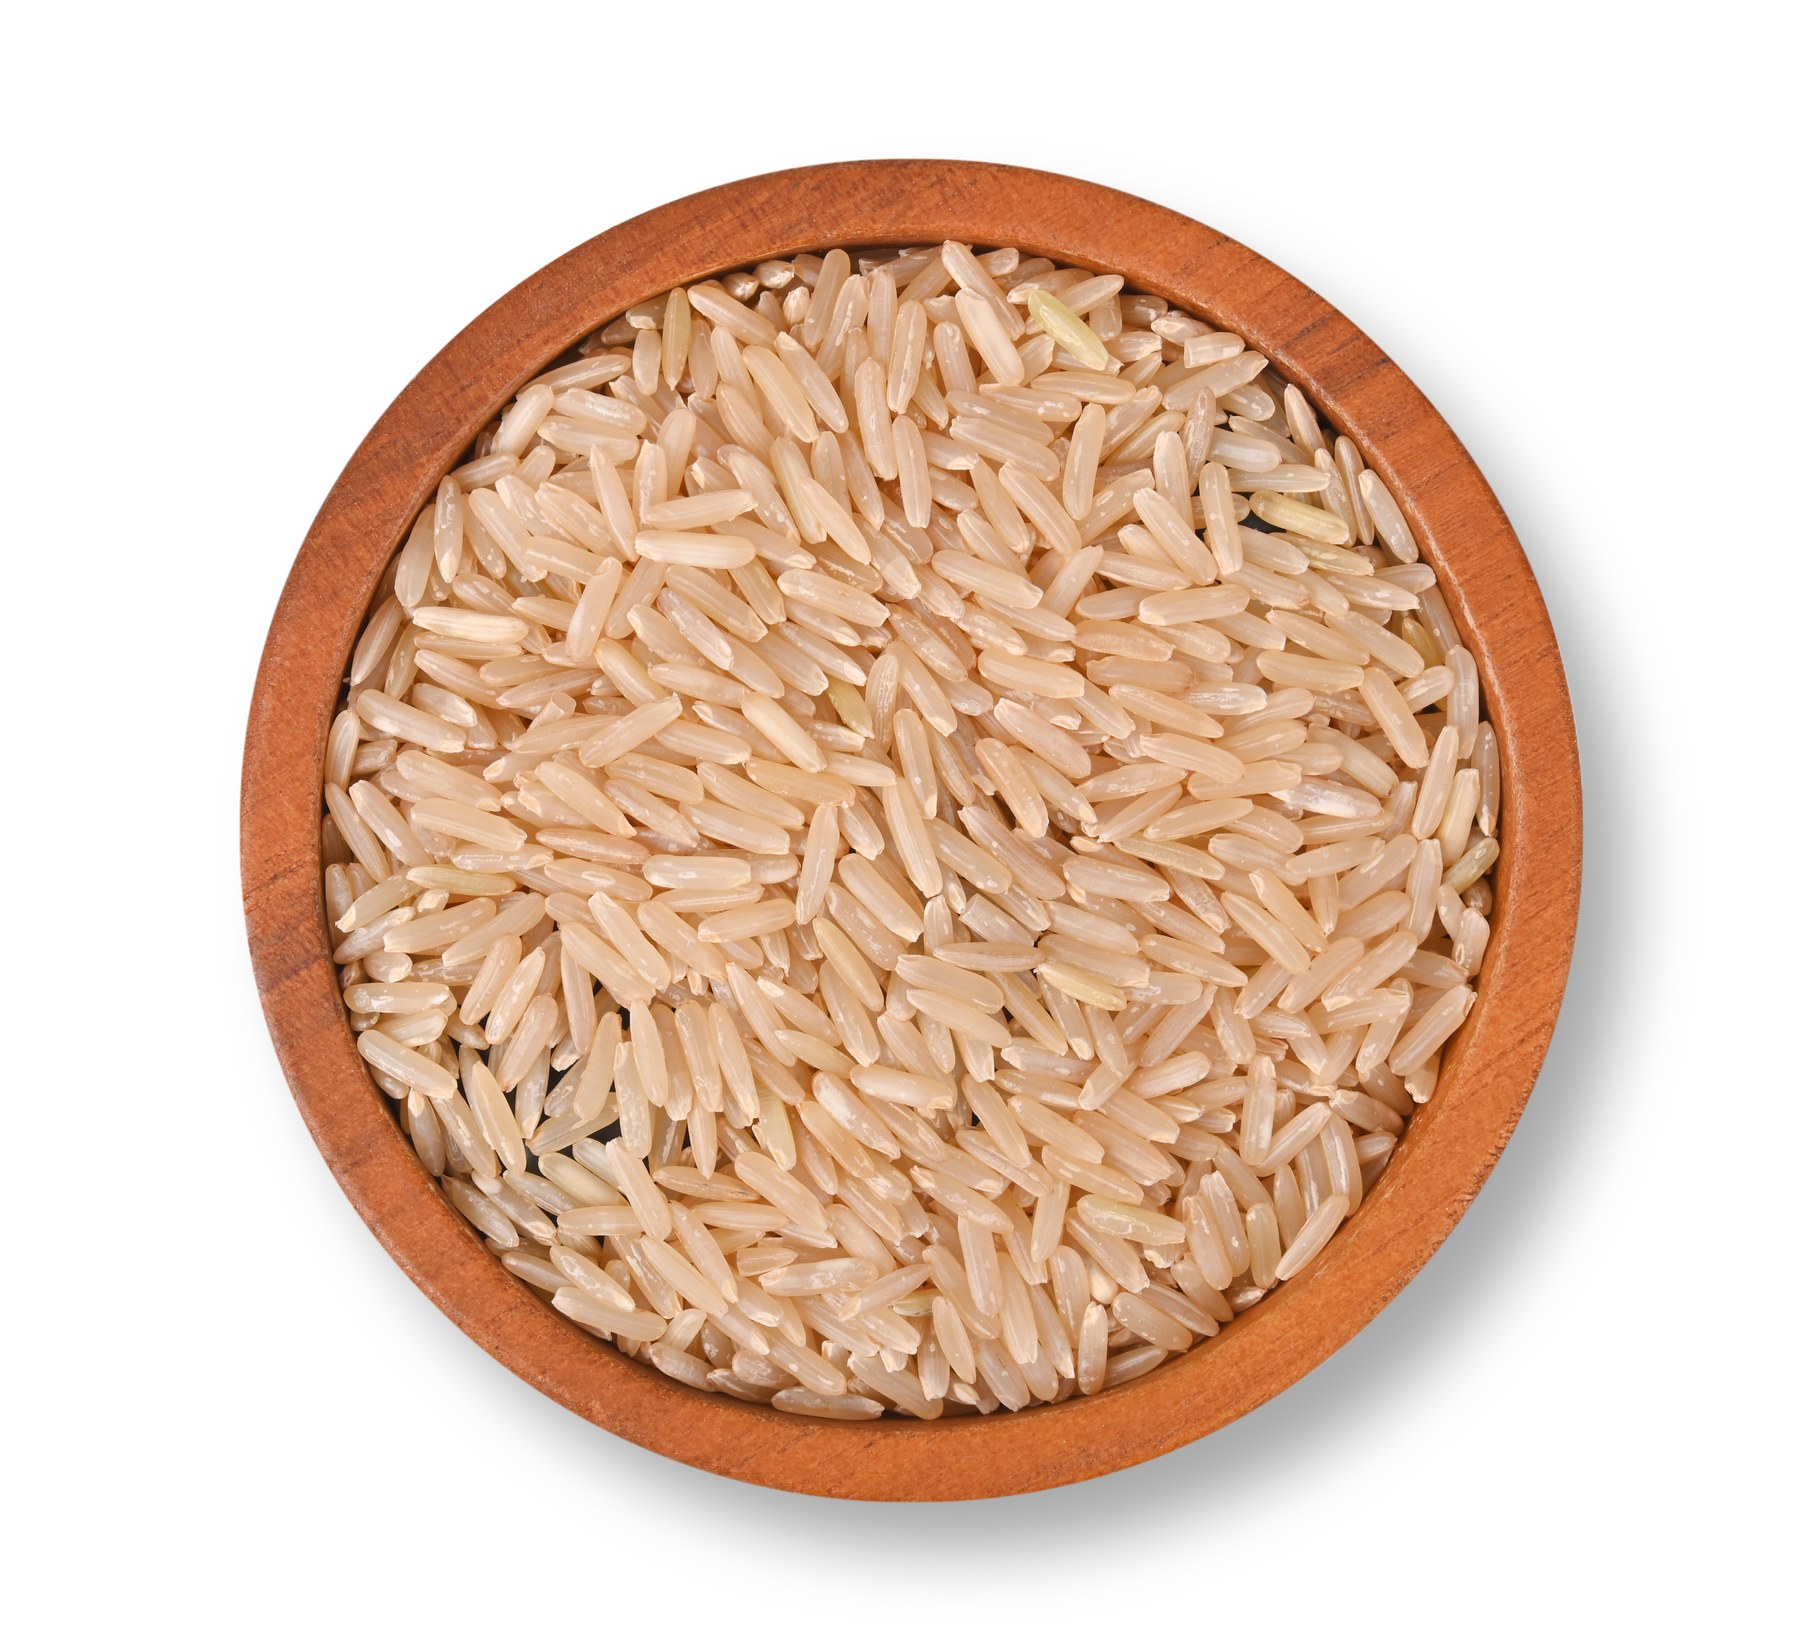 Natural whole grain rice that includes the bran of the rice grain